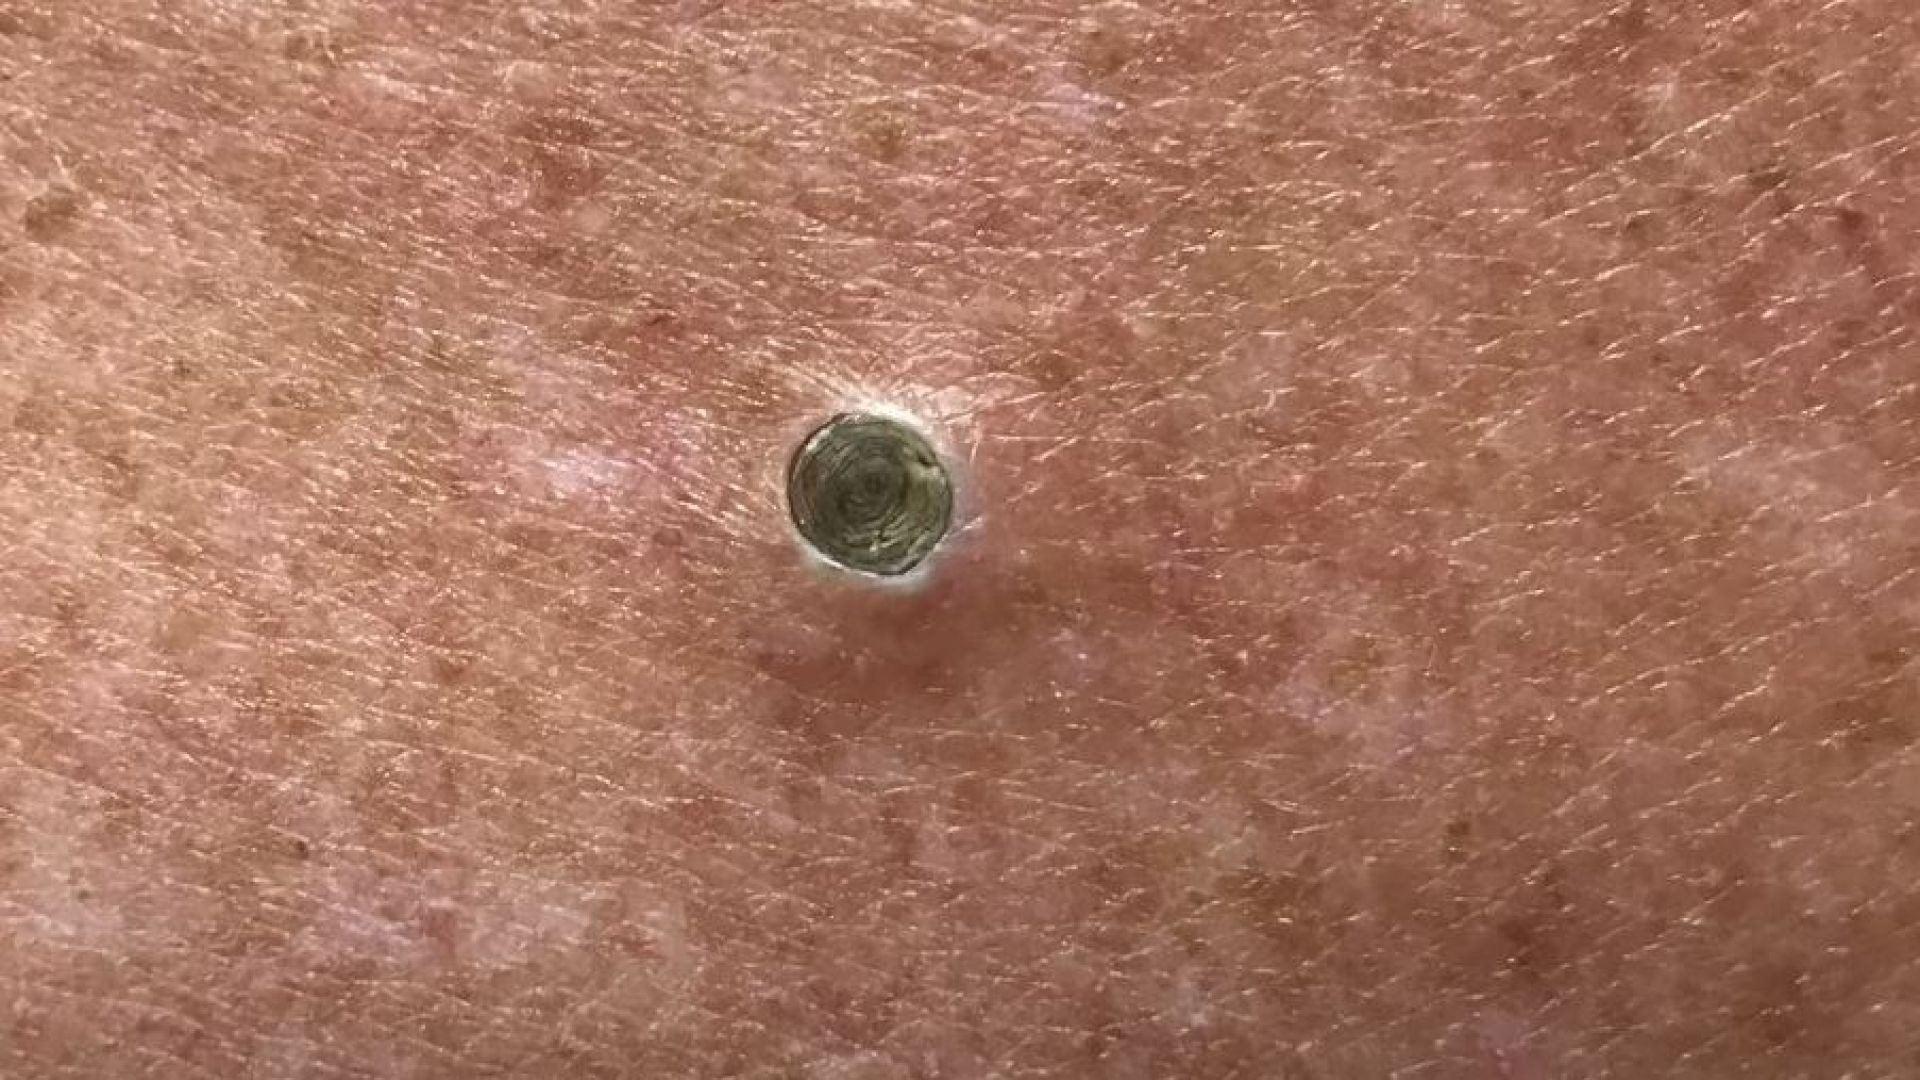 The Biggest Dilated Pore of Winer